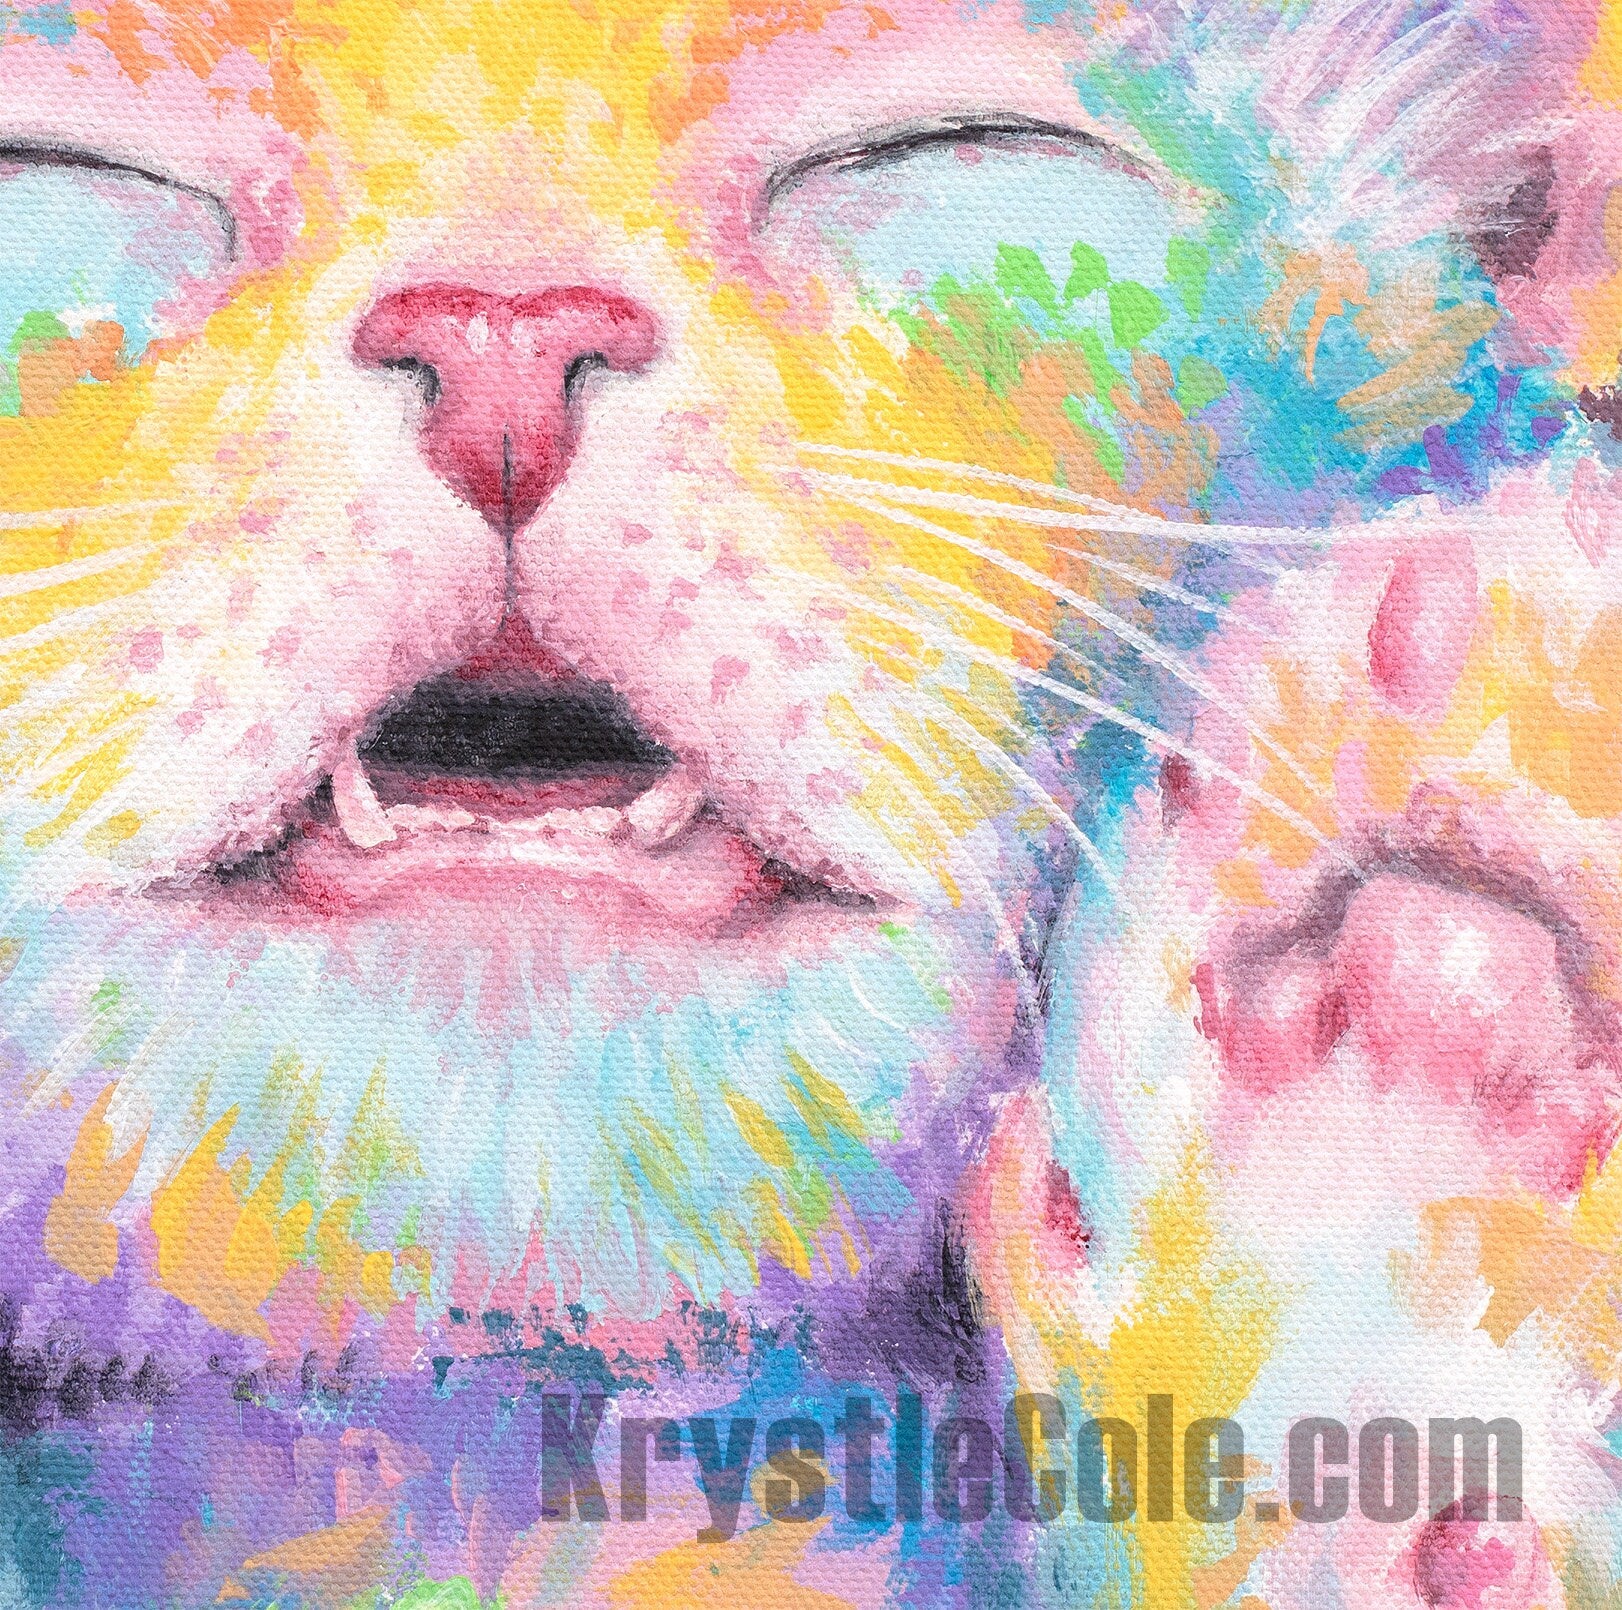 Sleeping Kitten Art - Cat Painting. Print on CANVAS or PAPER by Krystle Cole